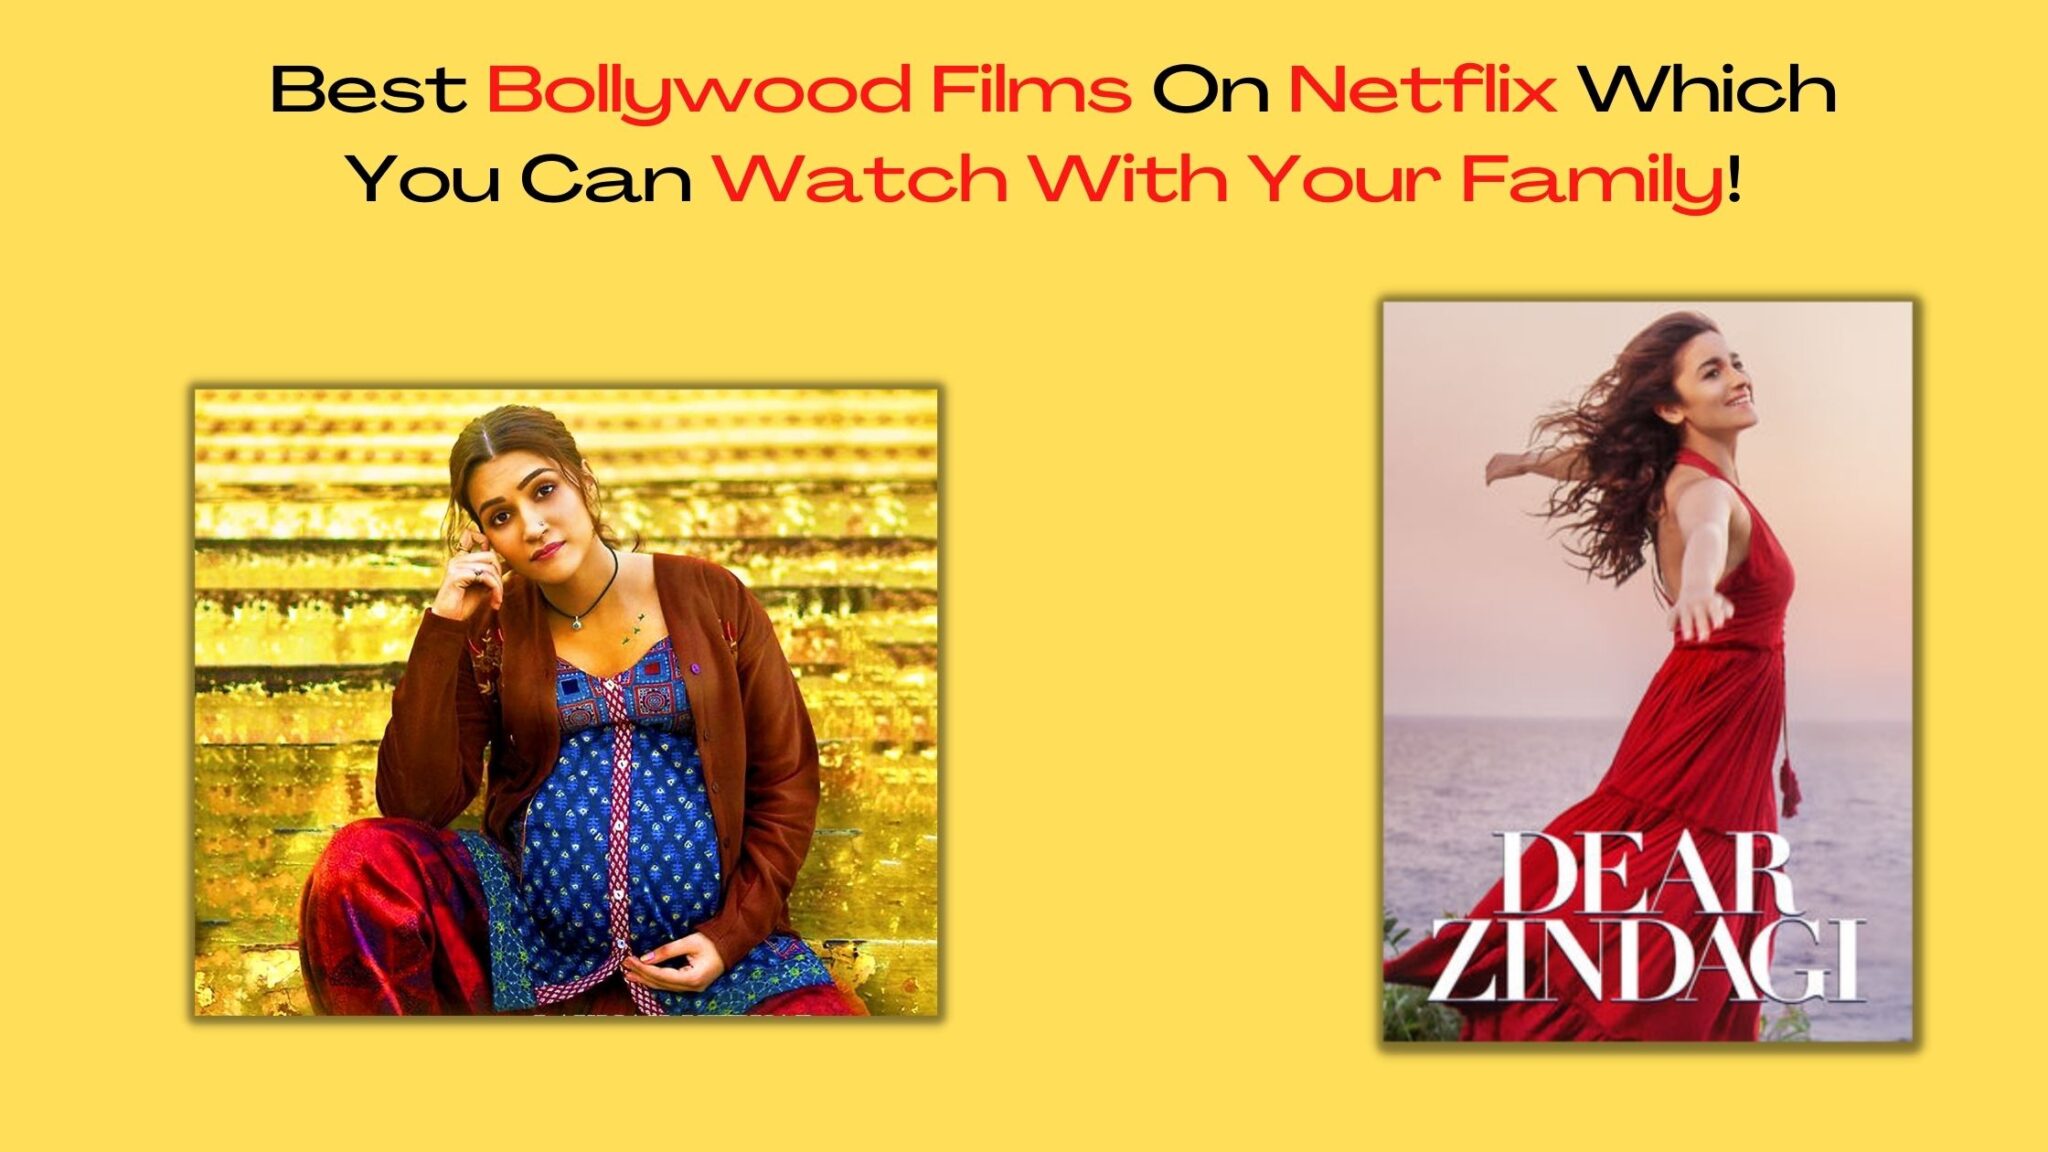 Best Bollywood Films On Netflix Which You Can Watch With Your Family